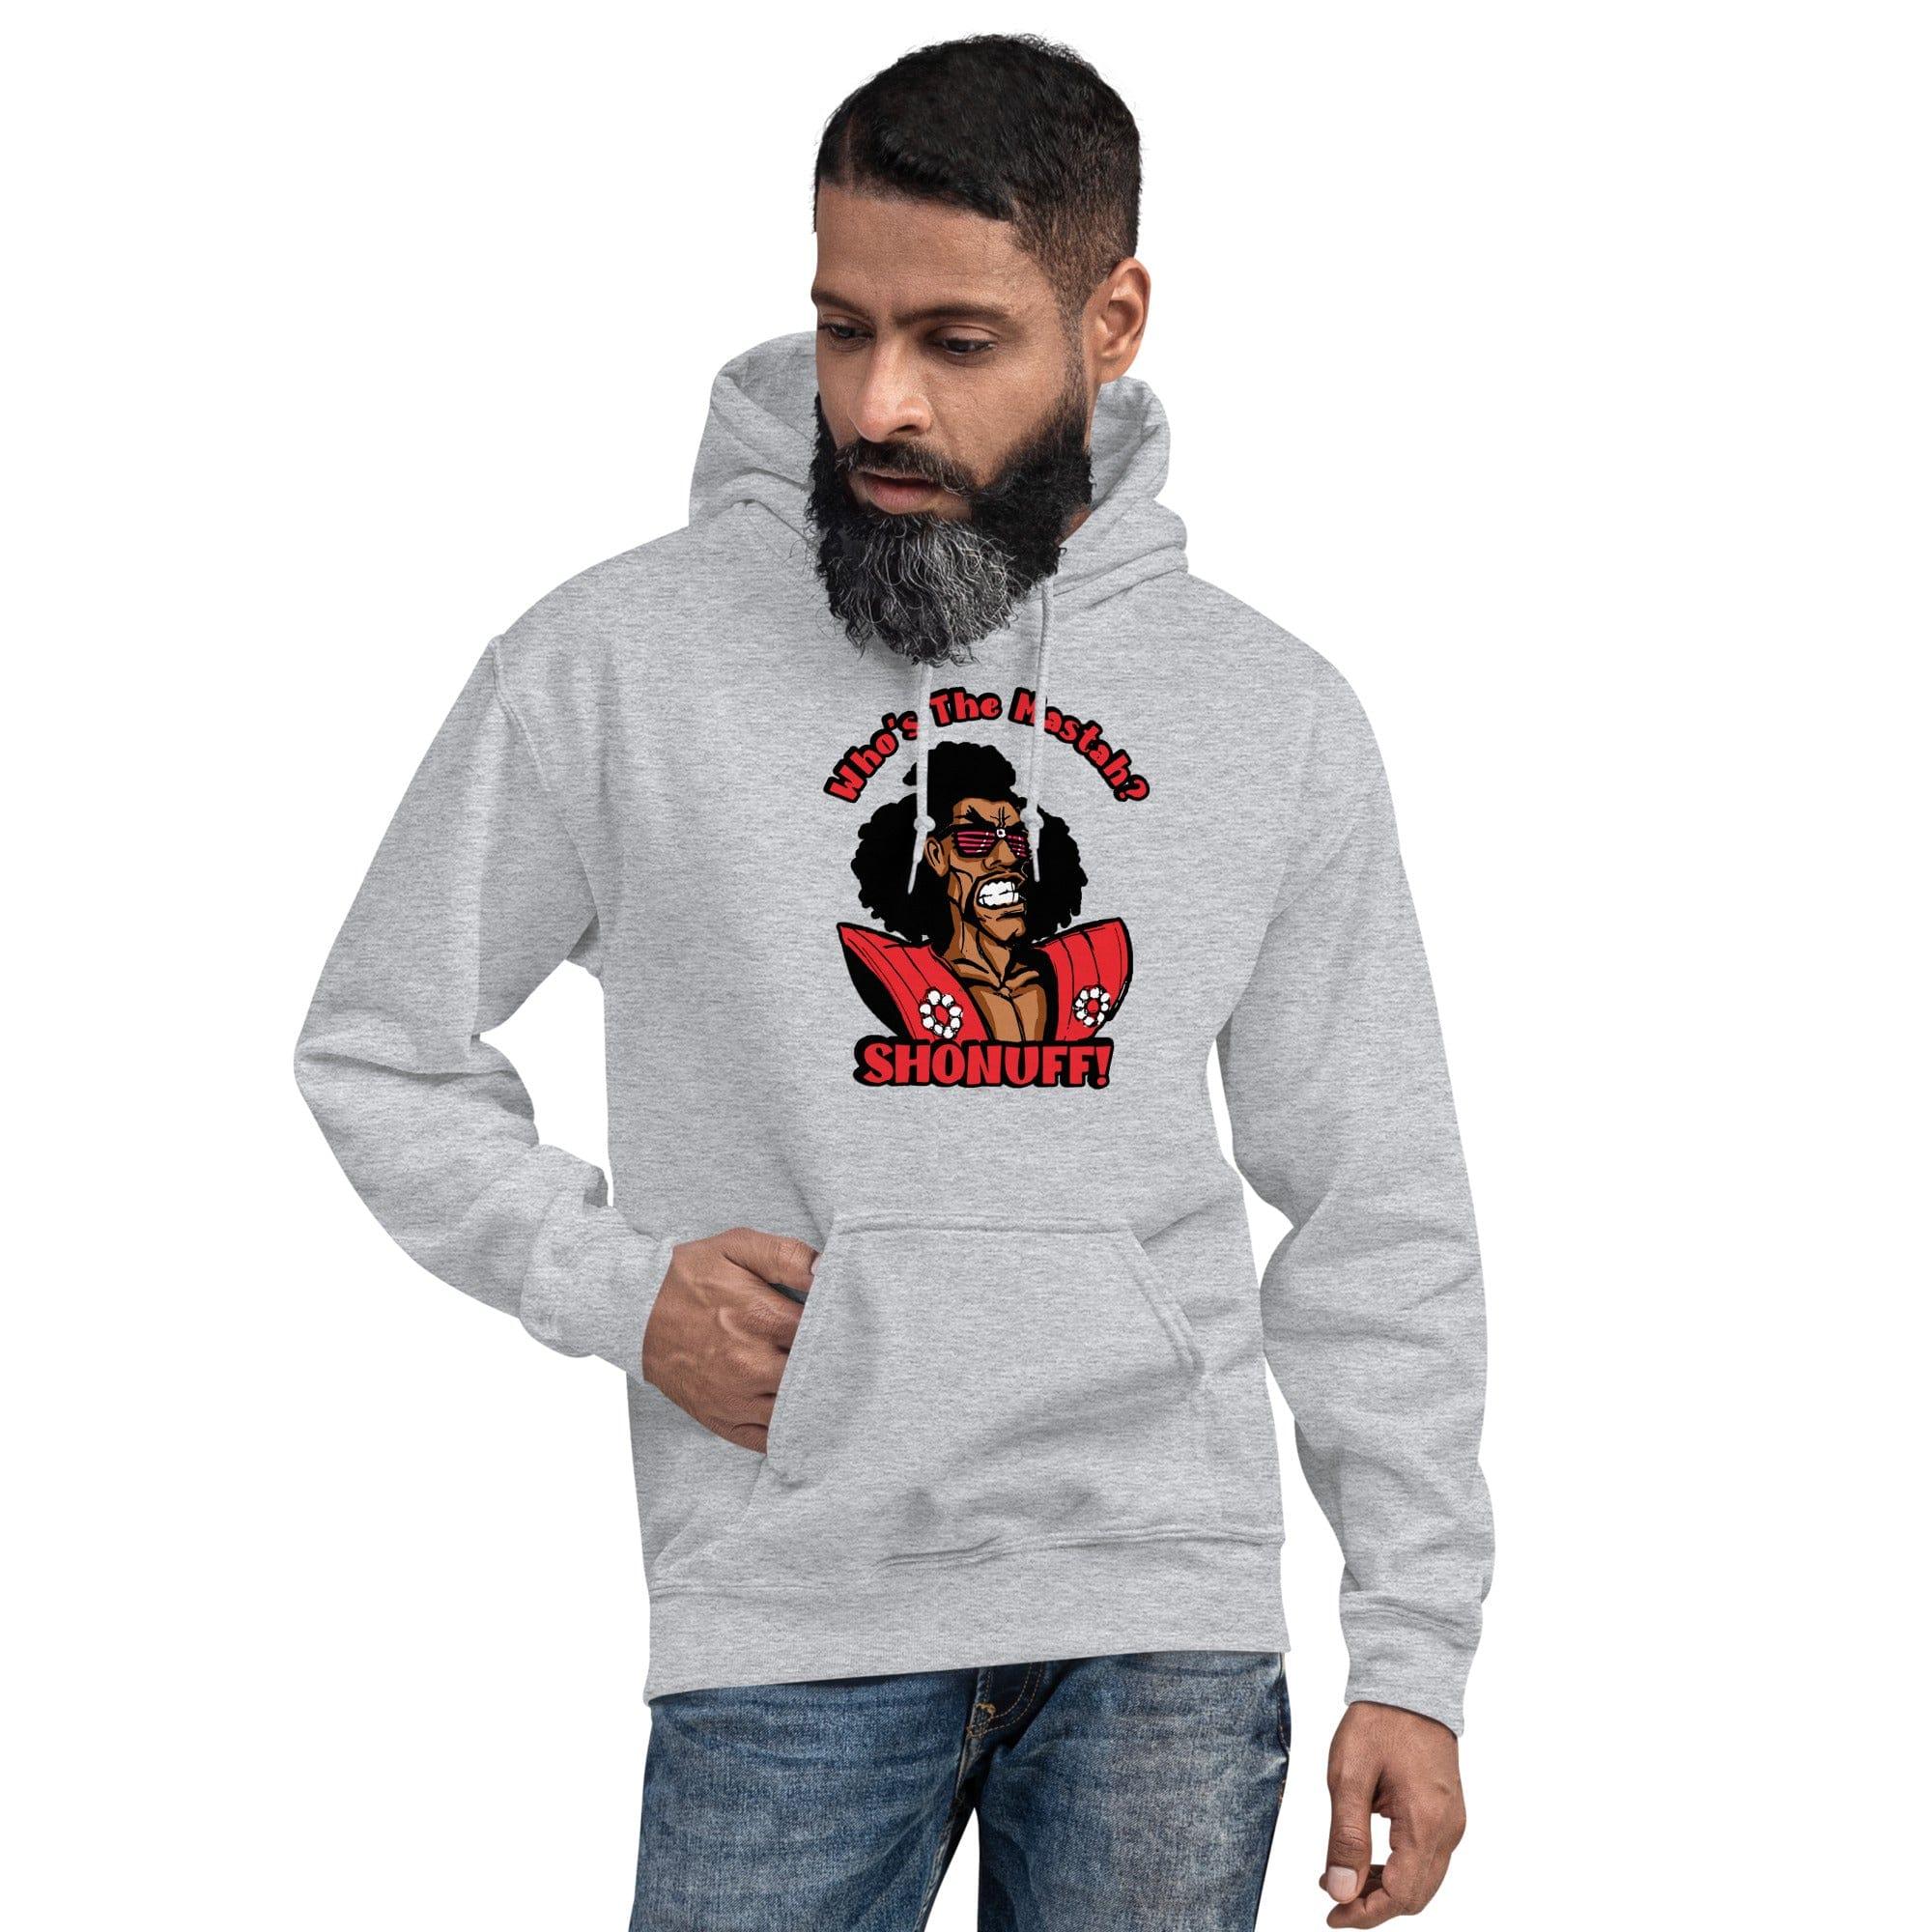 Movie Character Hoodie Who's the masteh ? Shonuff Bruce Lee's The Last Dragon Unisex Pullover - TopKoalaTee